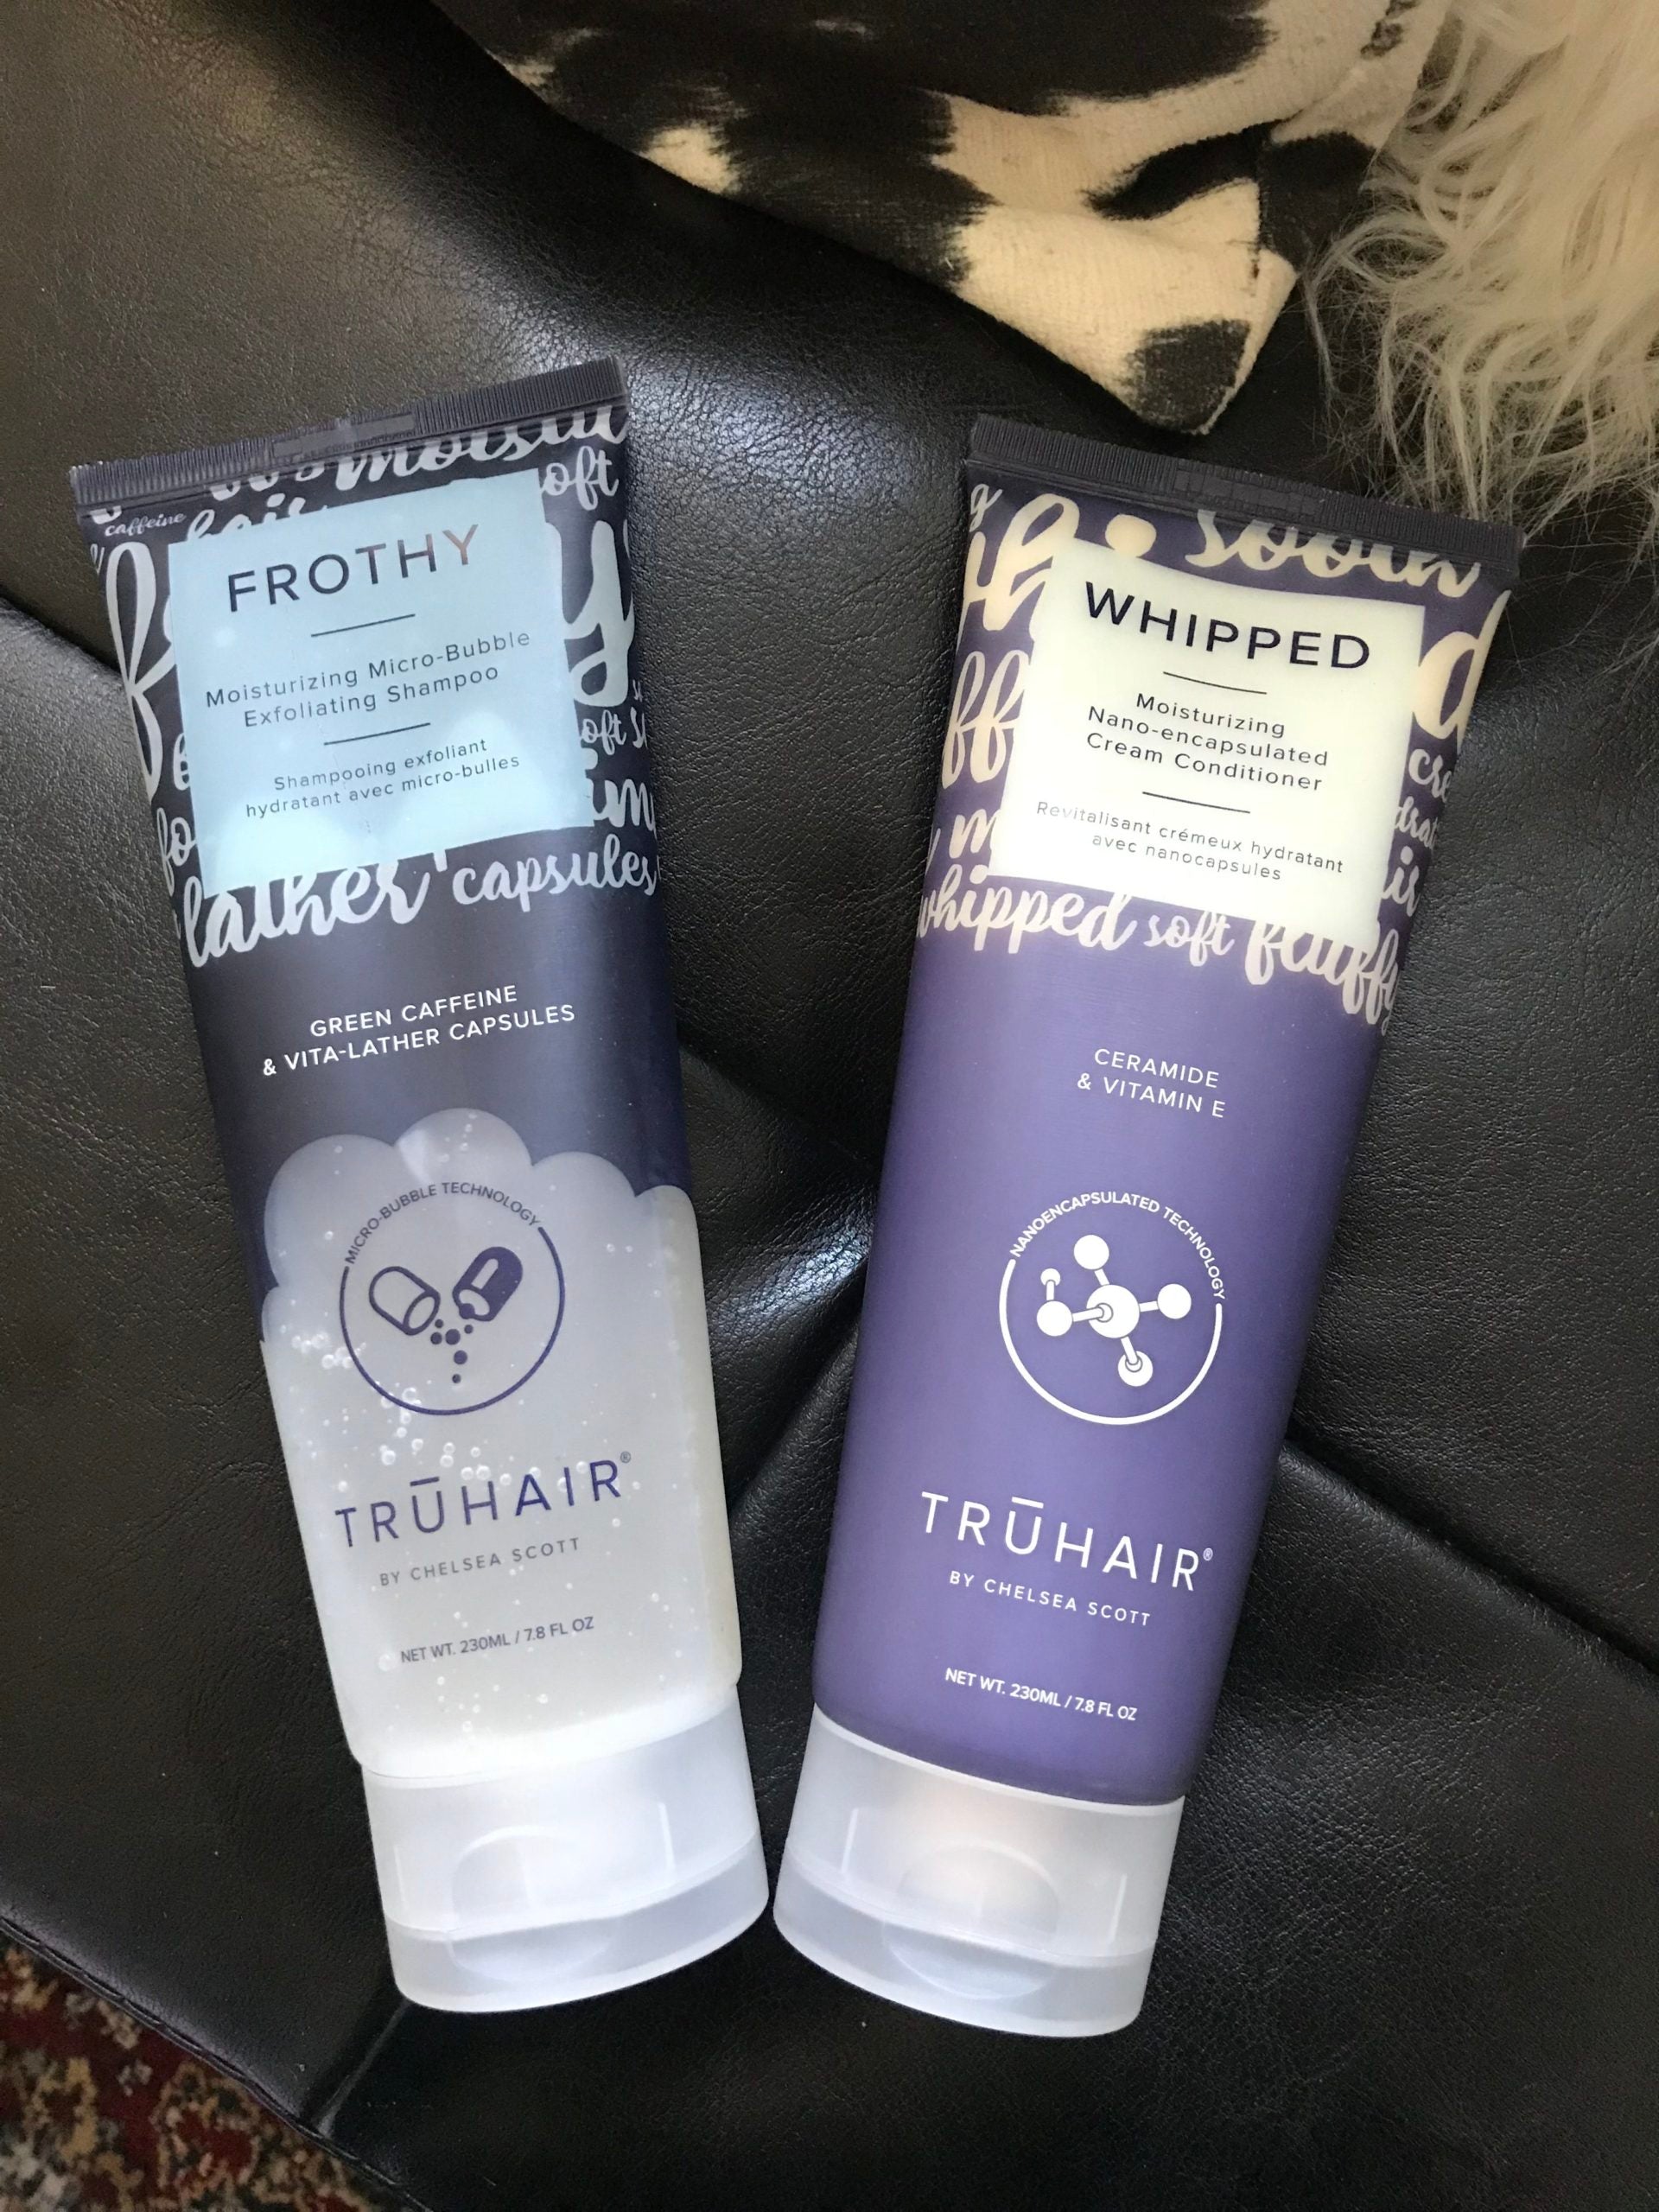 Review, Photos, Hairstyle, Haircare Trend 2019, 2020: TRUHAIR, Frothy Moisturizing Micro-Bubble Exfoliating Shampoo, Whipped Moisturizing Nano-Encapsulated Cream Conditioner